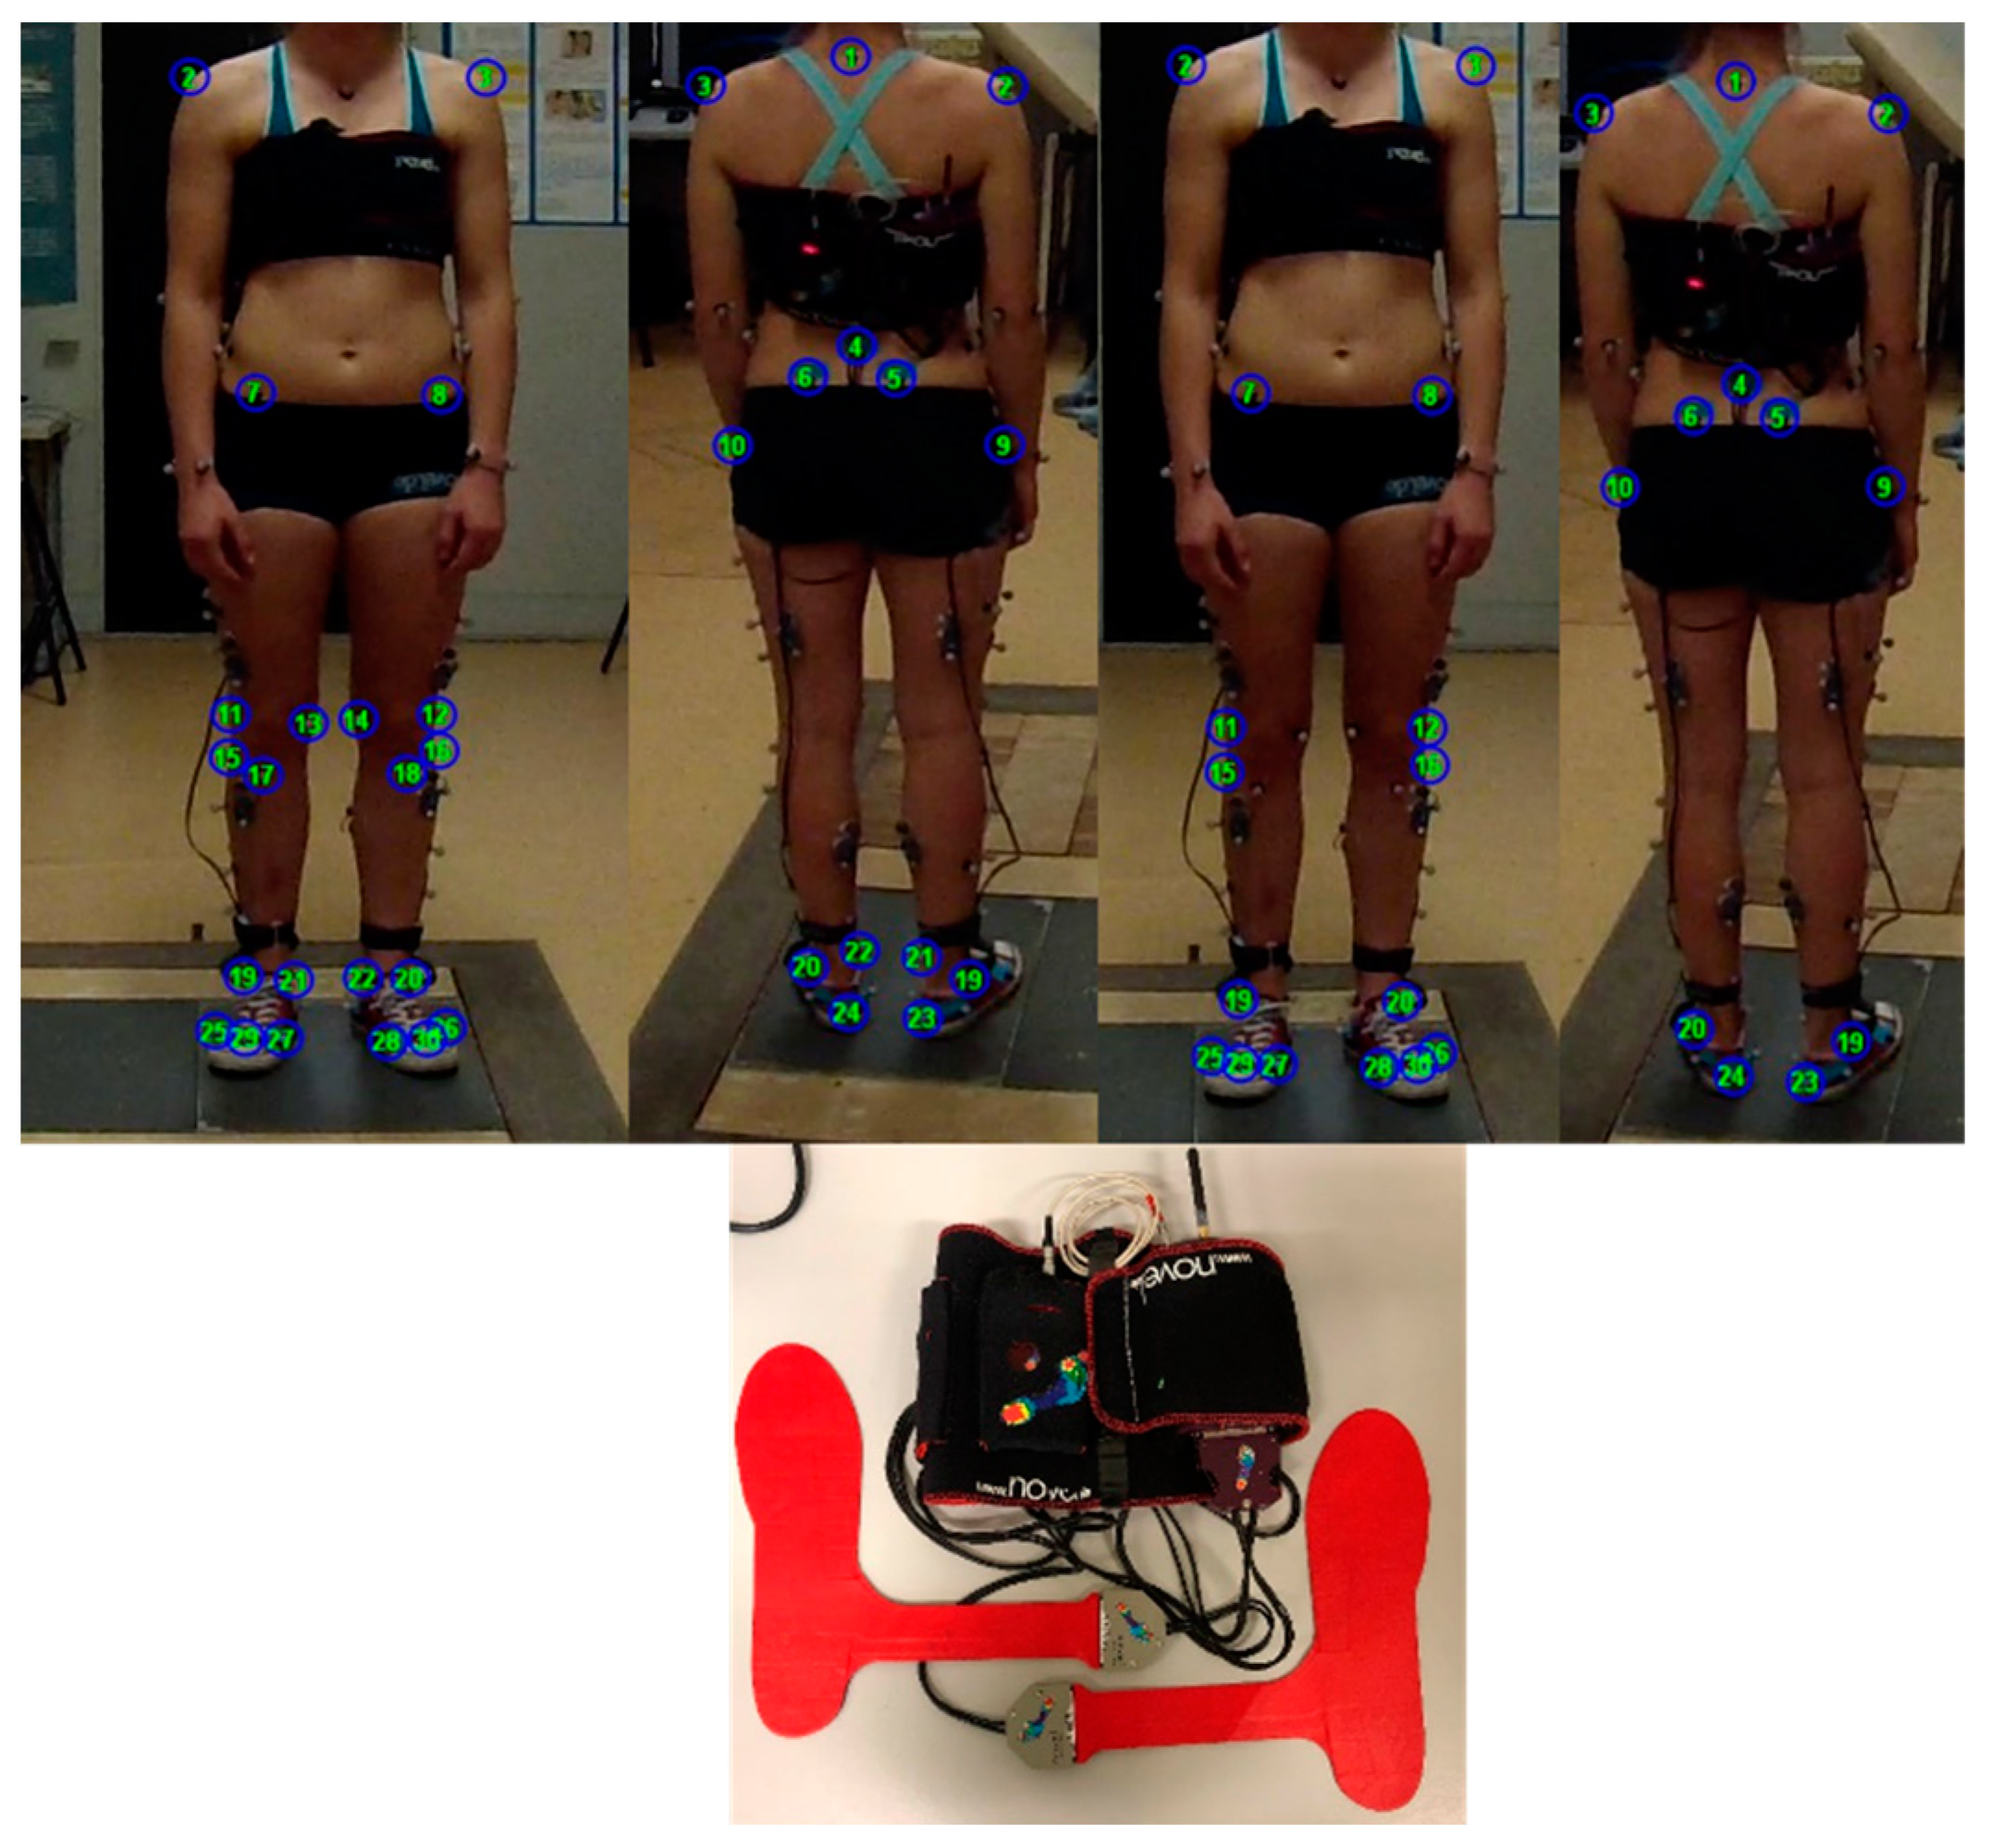 Sensors Free Full-Text Reliability and Repeatability of ACL Quick Checkandreg; A Methodology for on Field Lower Limb Joint Kinematics and Kinetics Assessment in Sport Applications